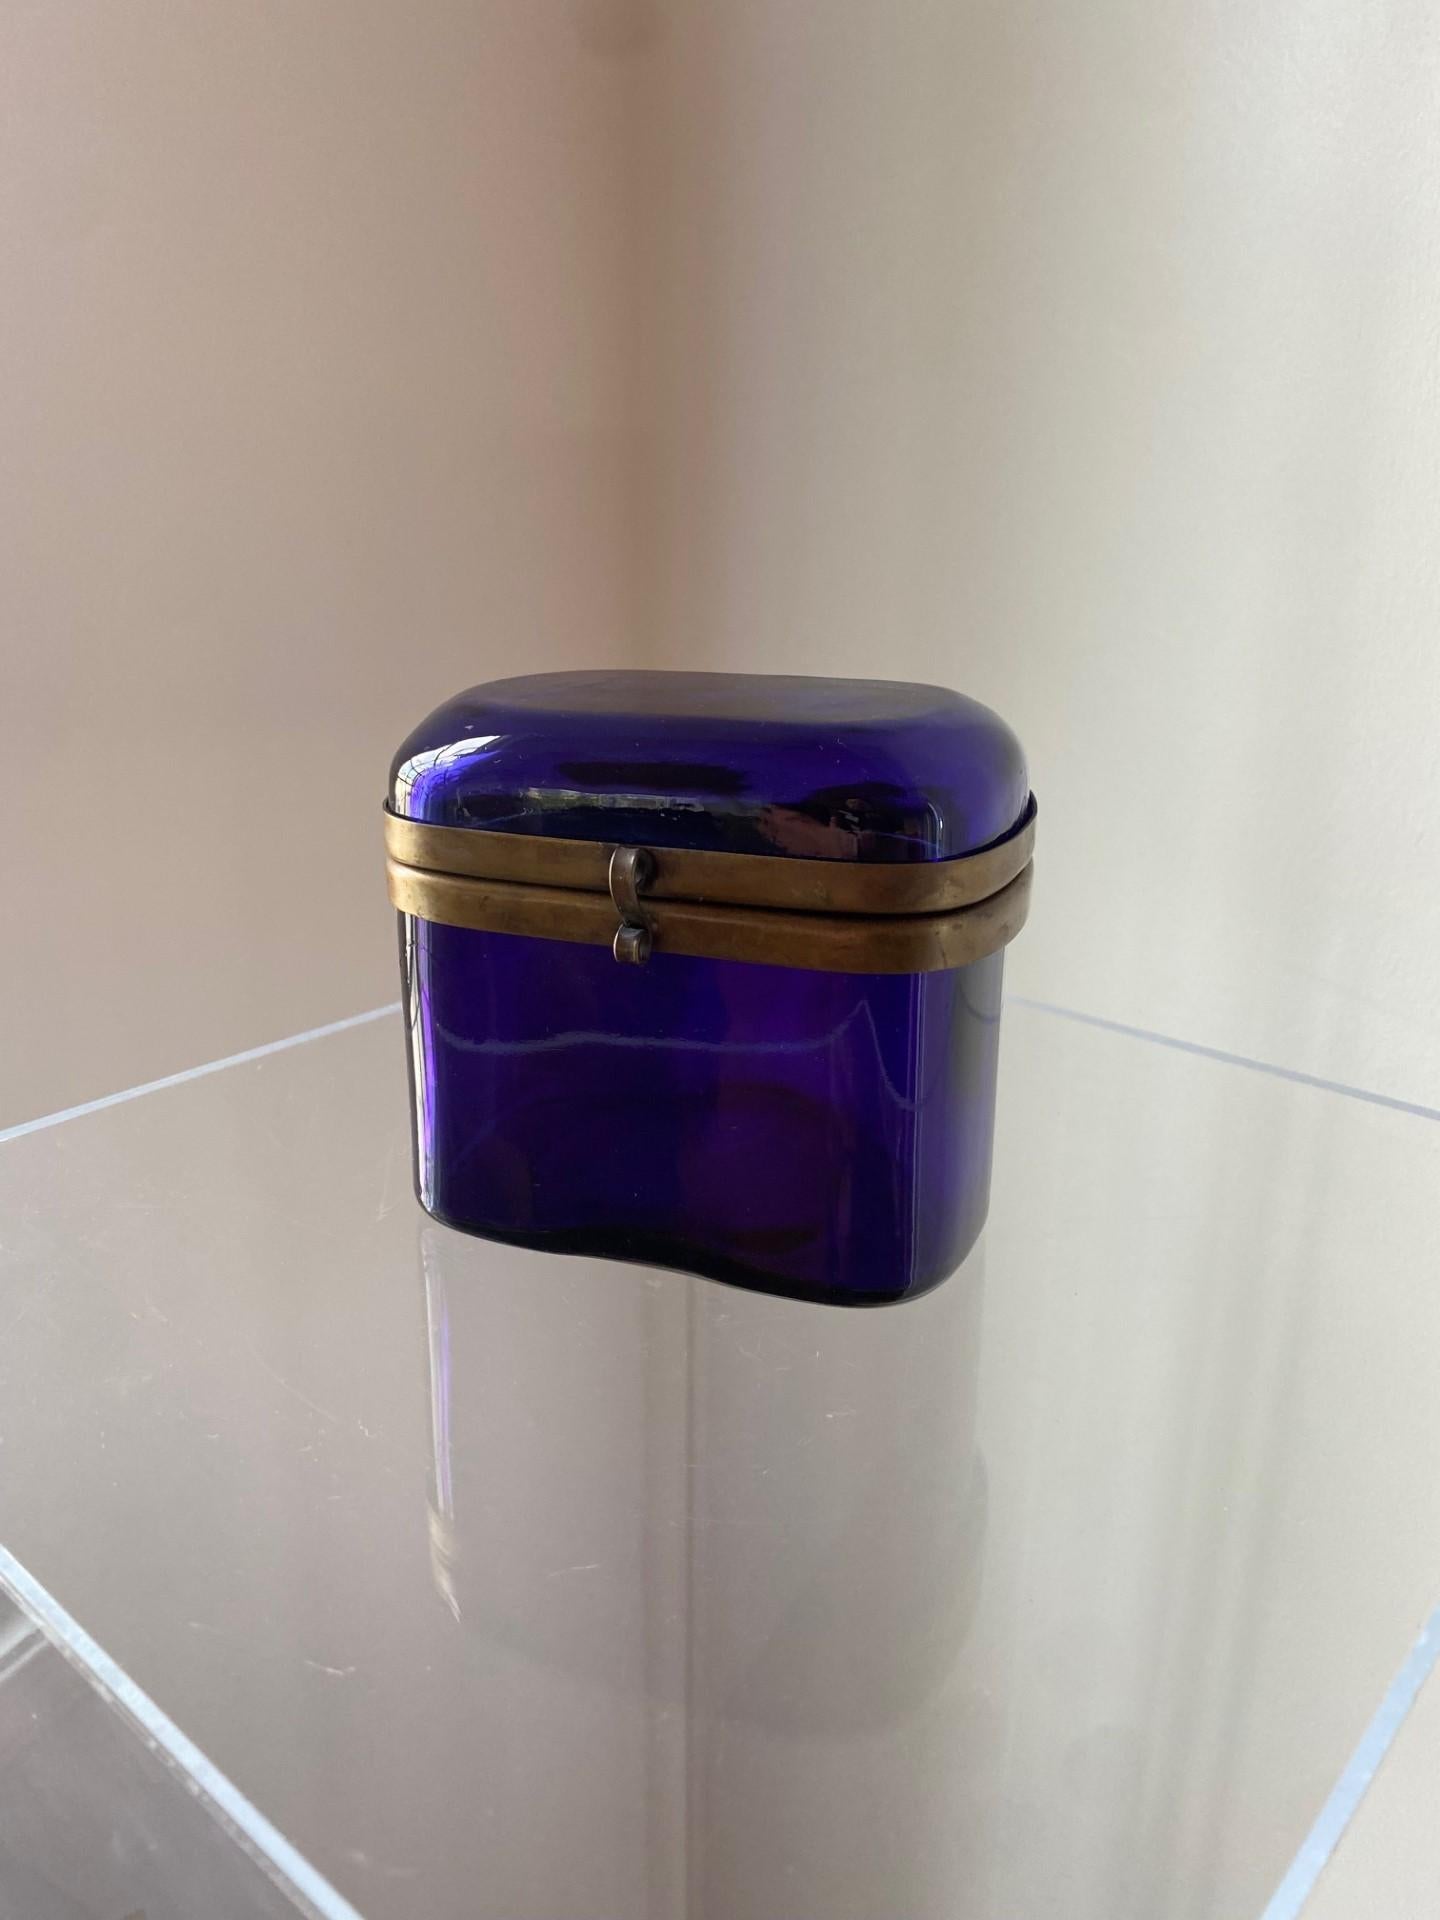 Vintage and rare murano glass box with brass detail.  These beautiful glass boxes are treasured objects that stand the test of time with their incredible beauty and craftmanship.  Created in a beautiful cobalt blue glass, this piece is emphasized by